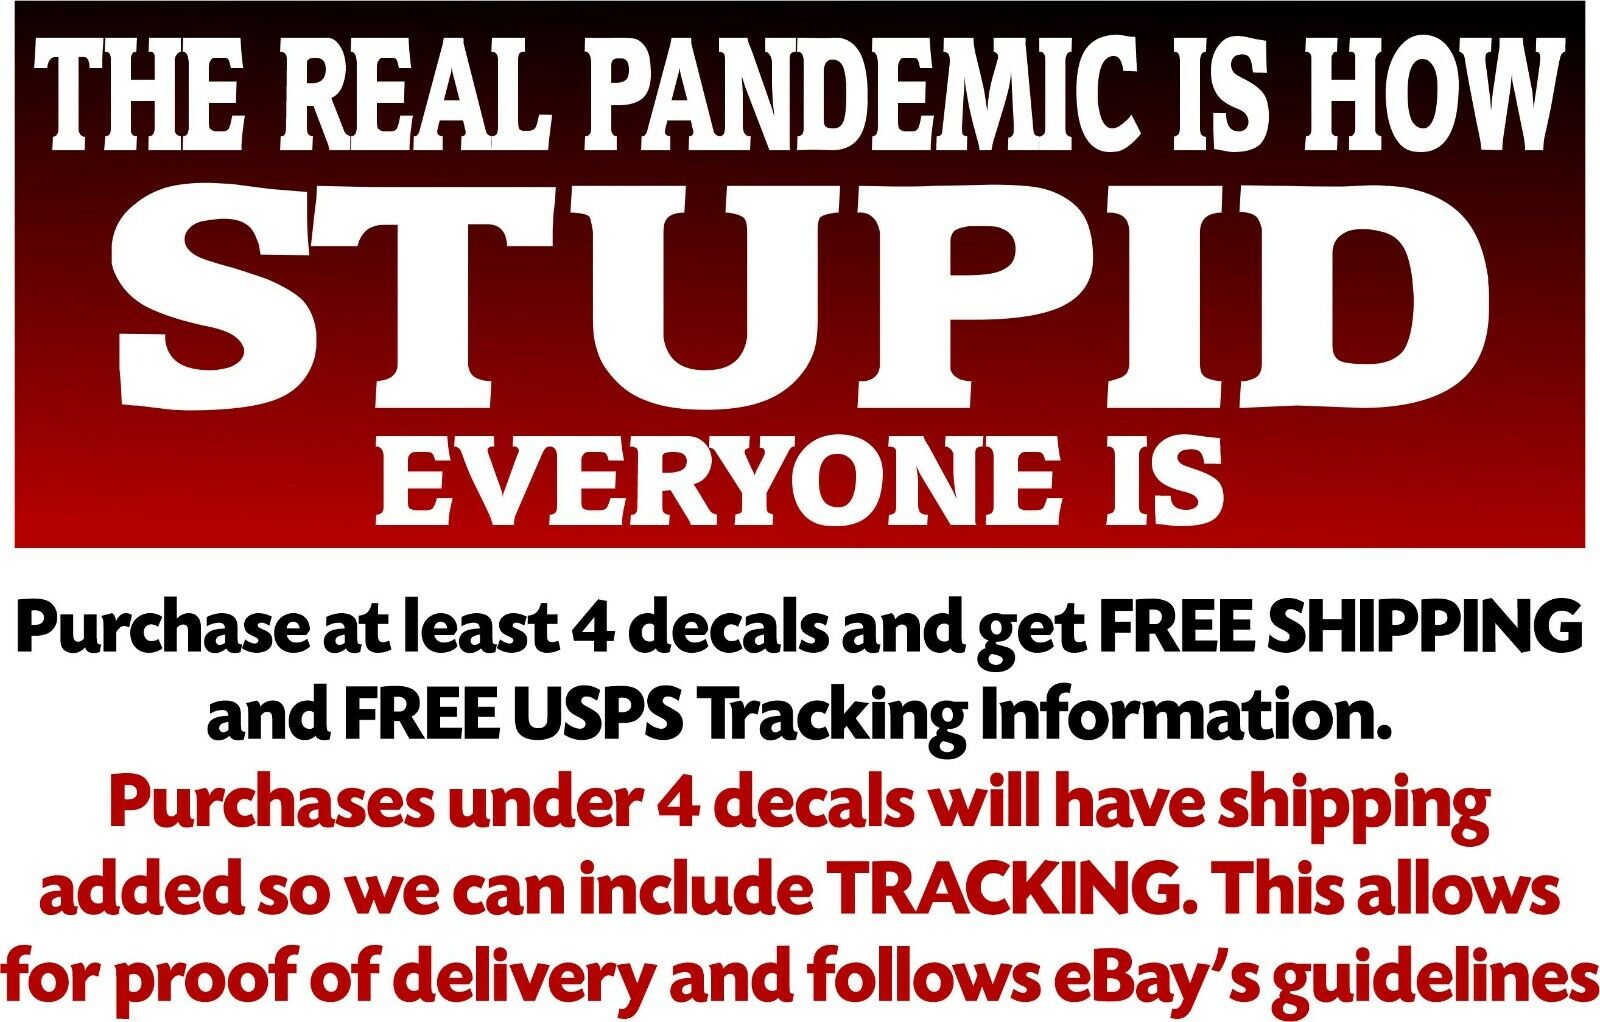 The Real Pandemic is how Stupid Everyone is Bumper Sticker 8.7